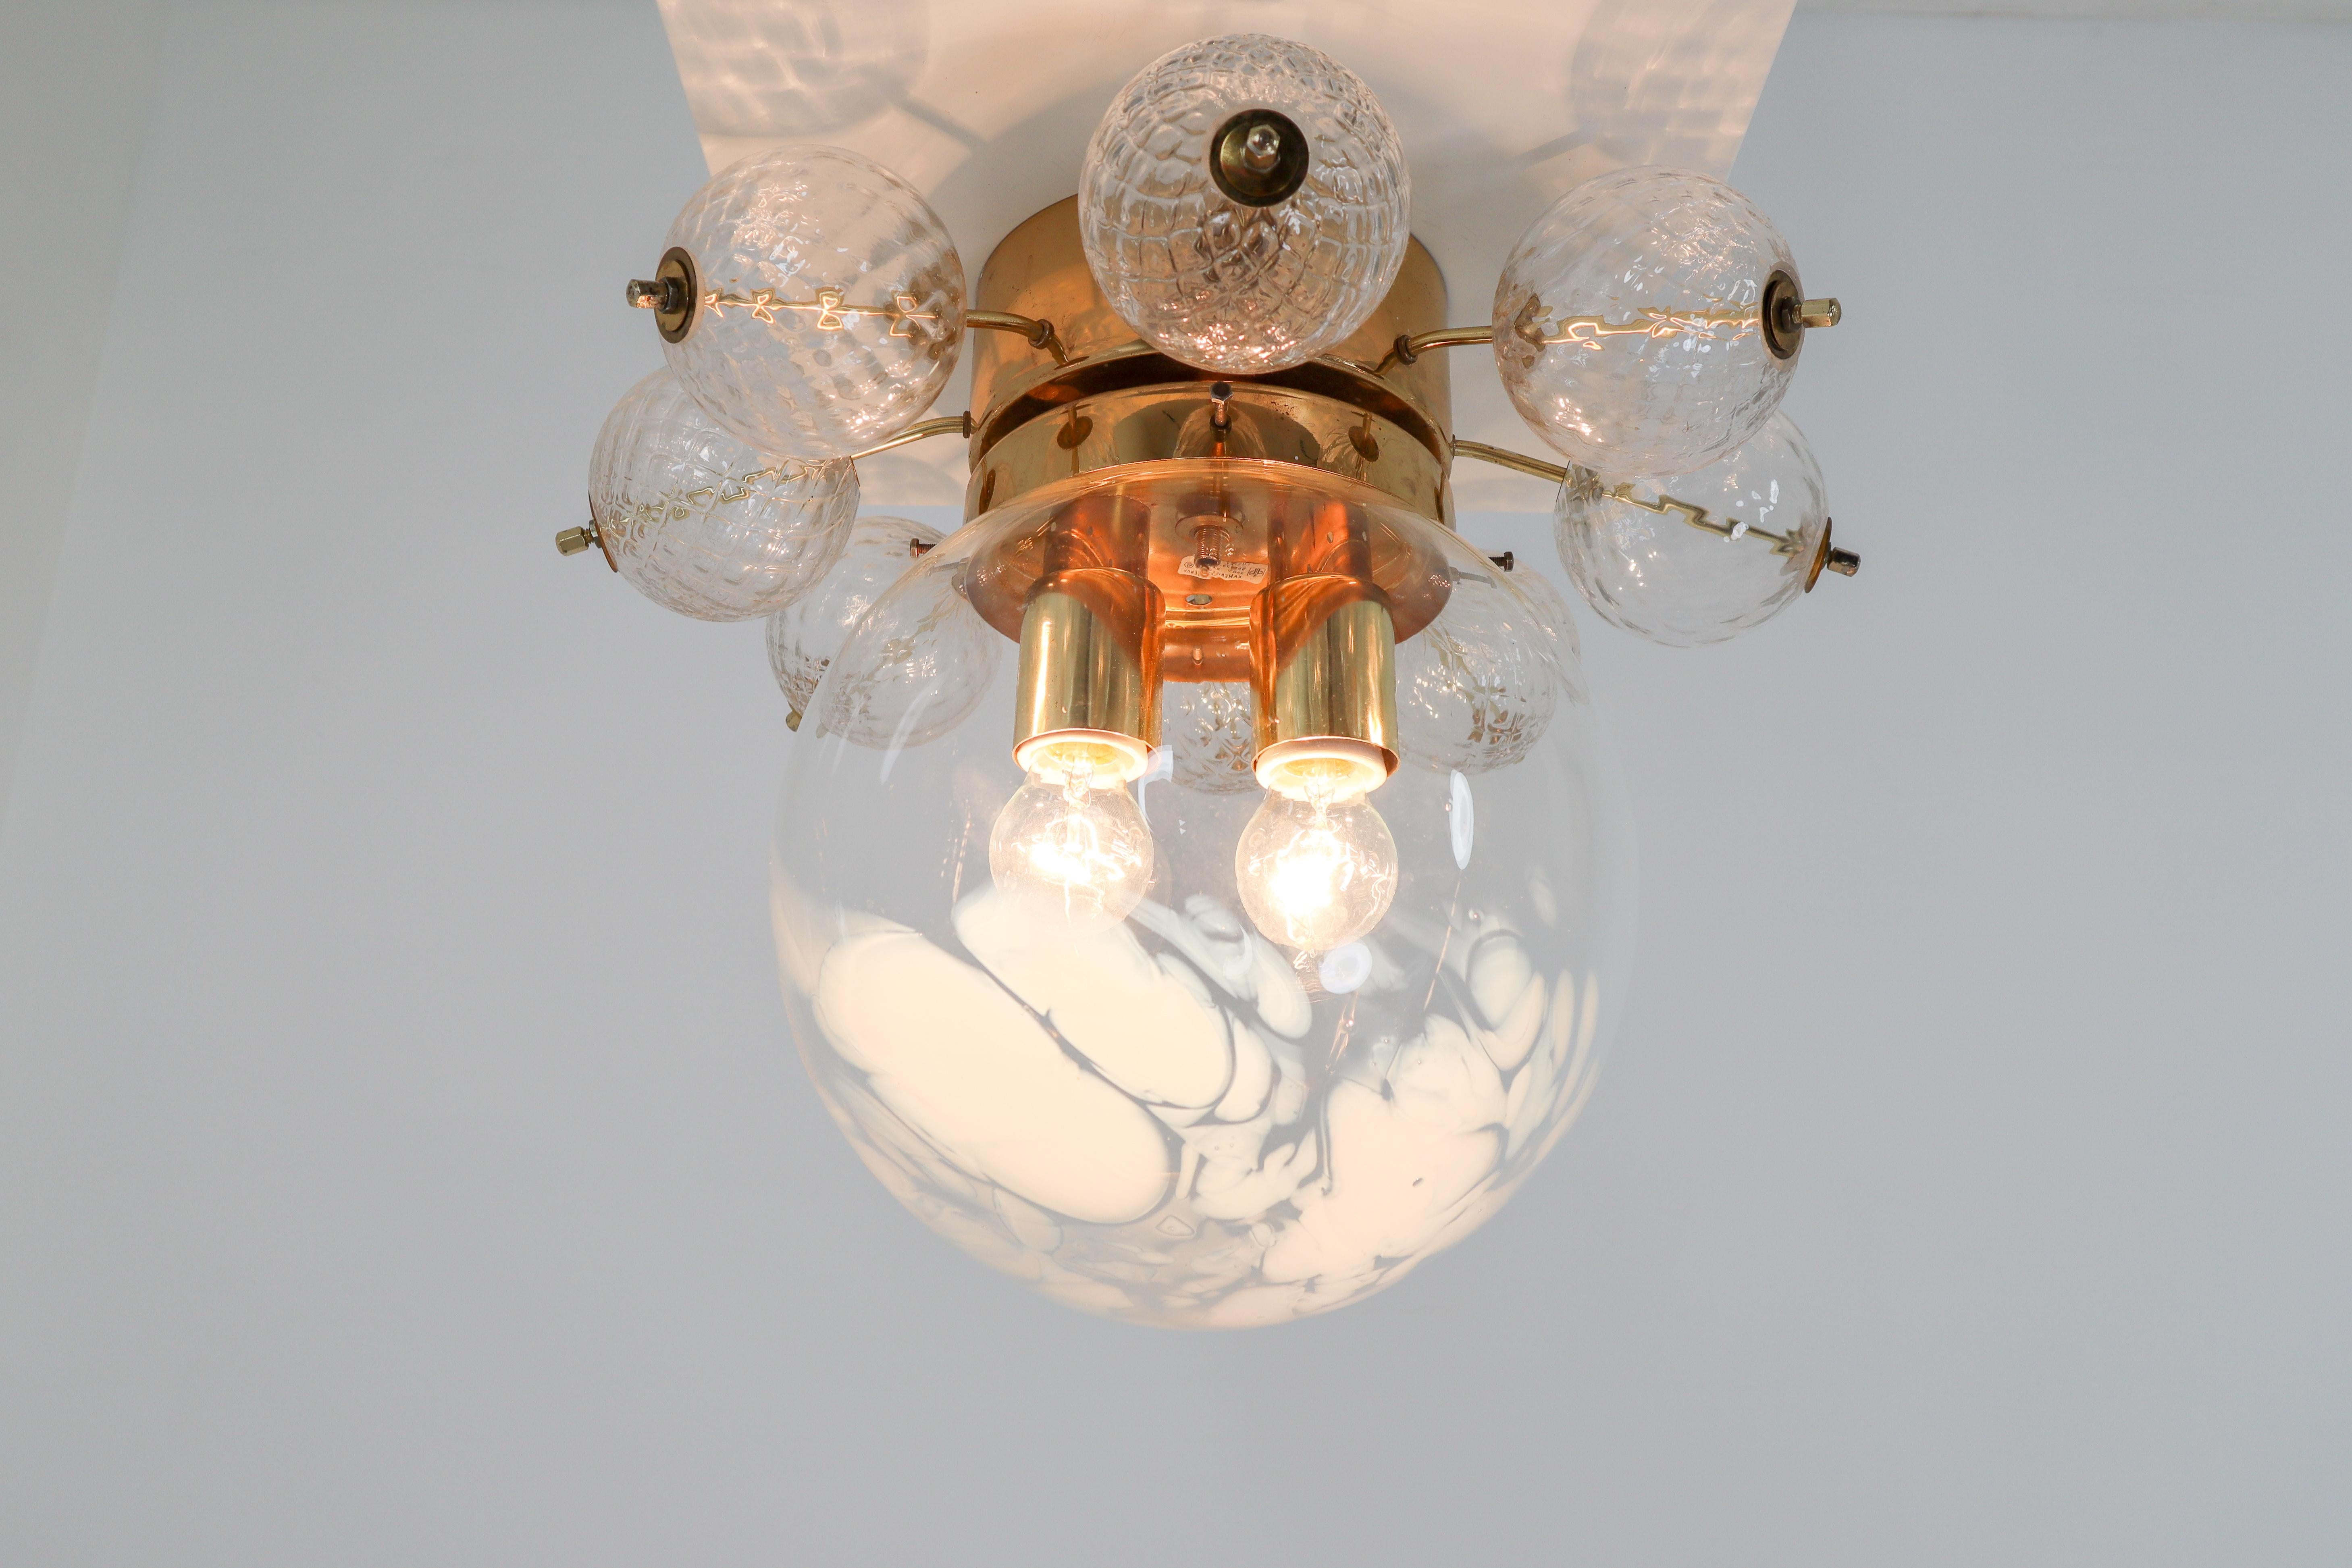 Large Midcentury Brass Ceiling Lamp-Chandelier with Handblown Art-Glass , 1960s For Sale 3